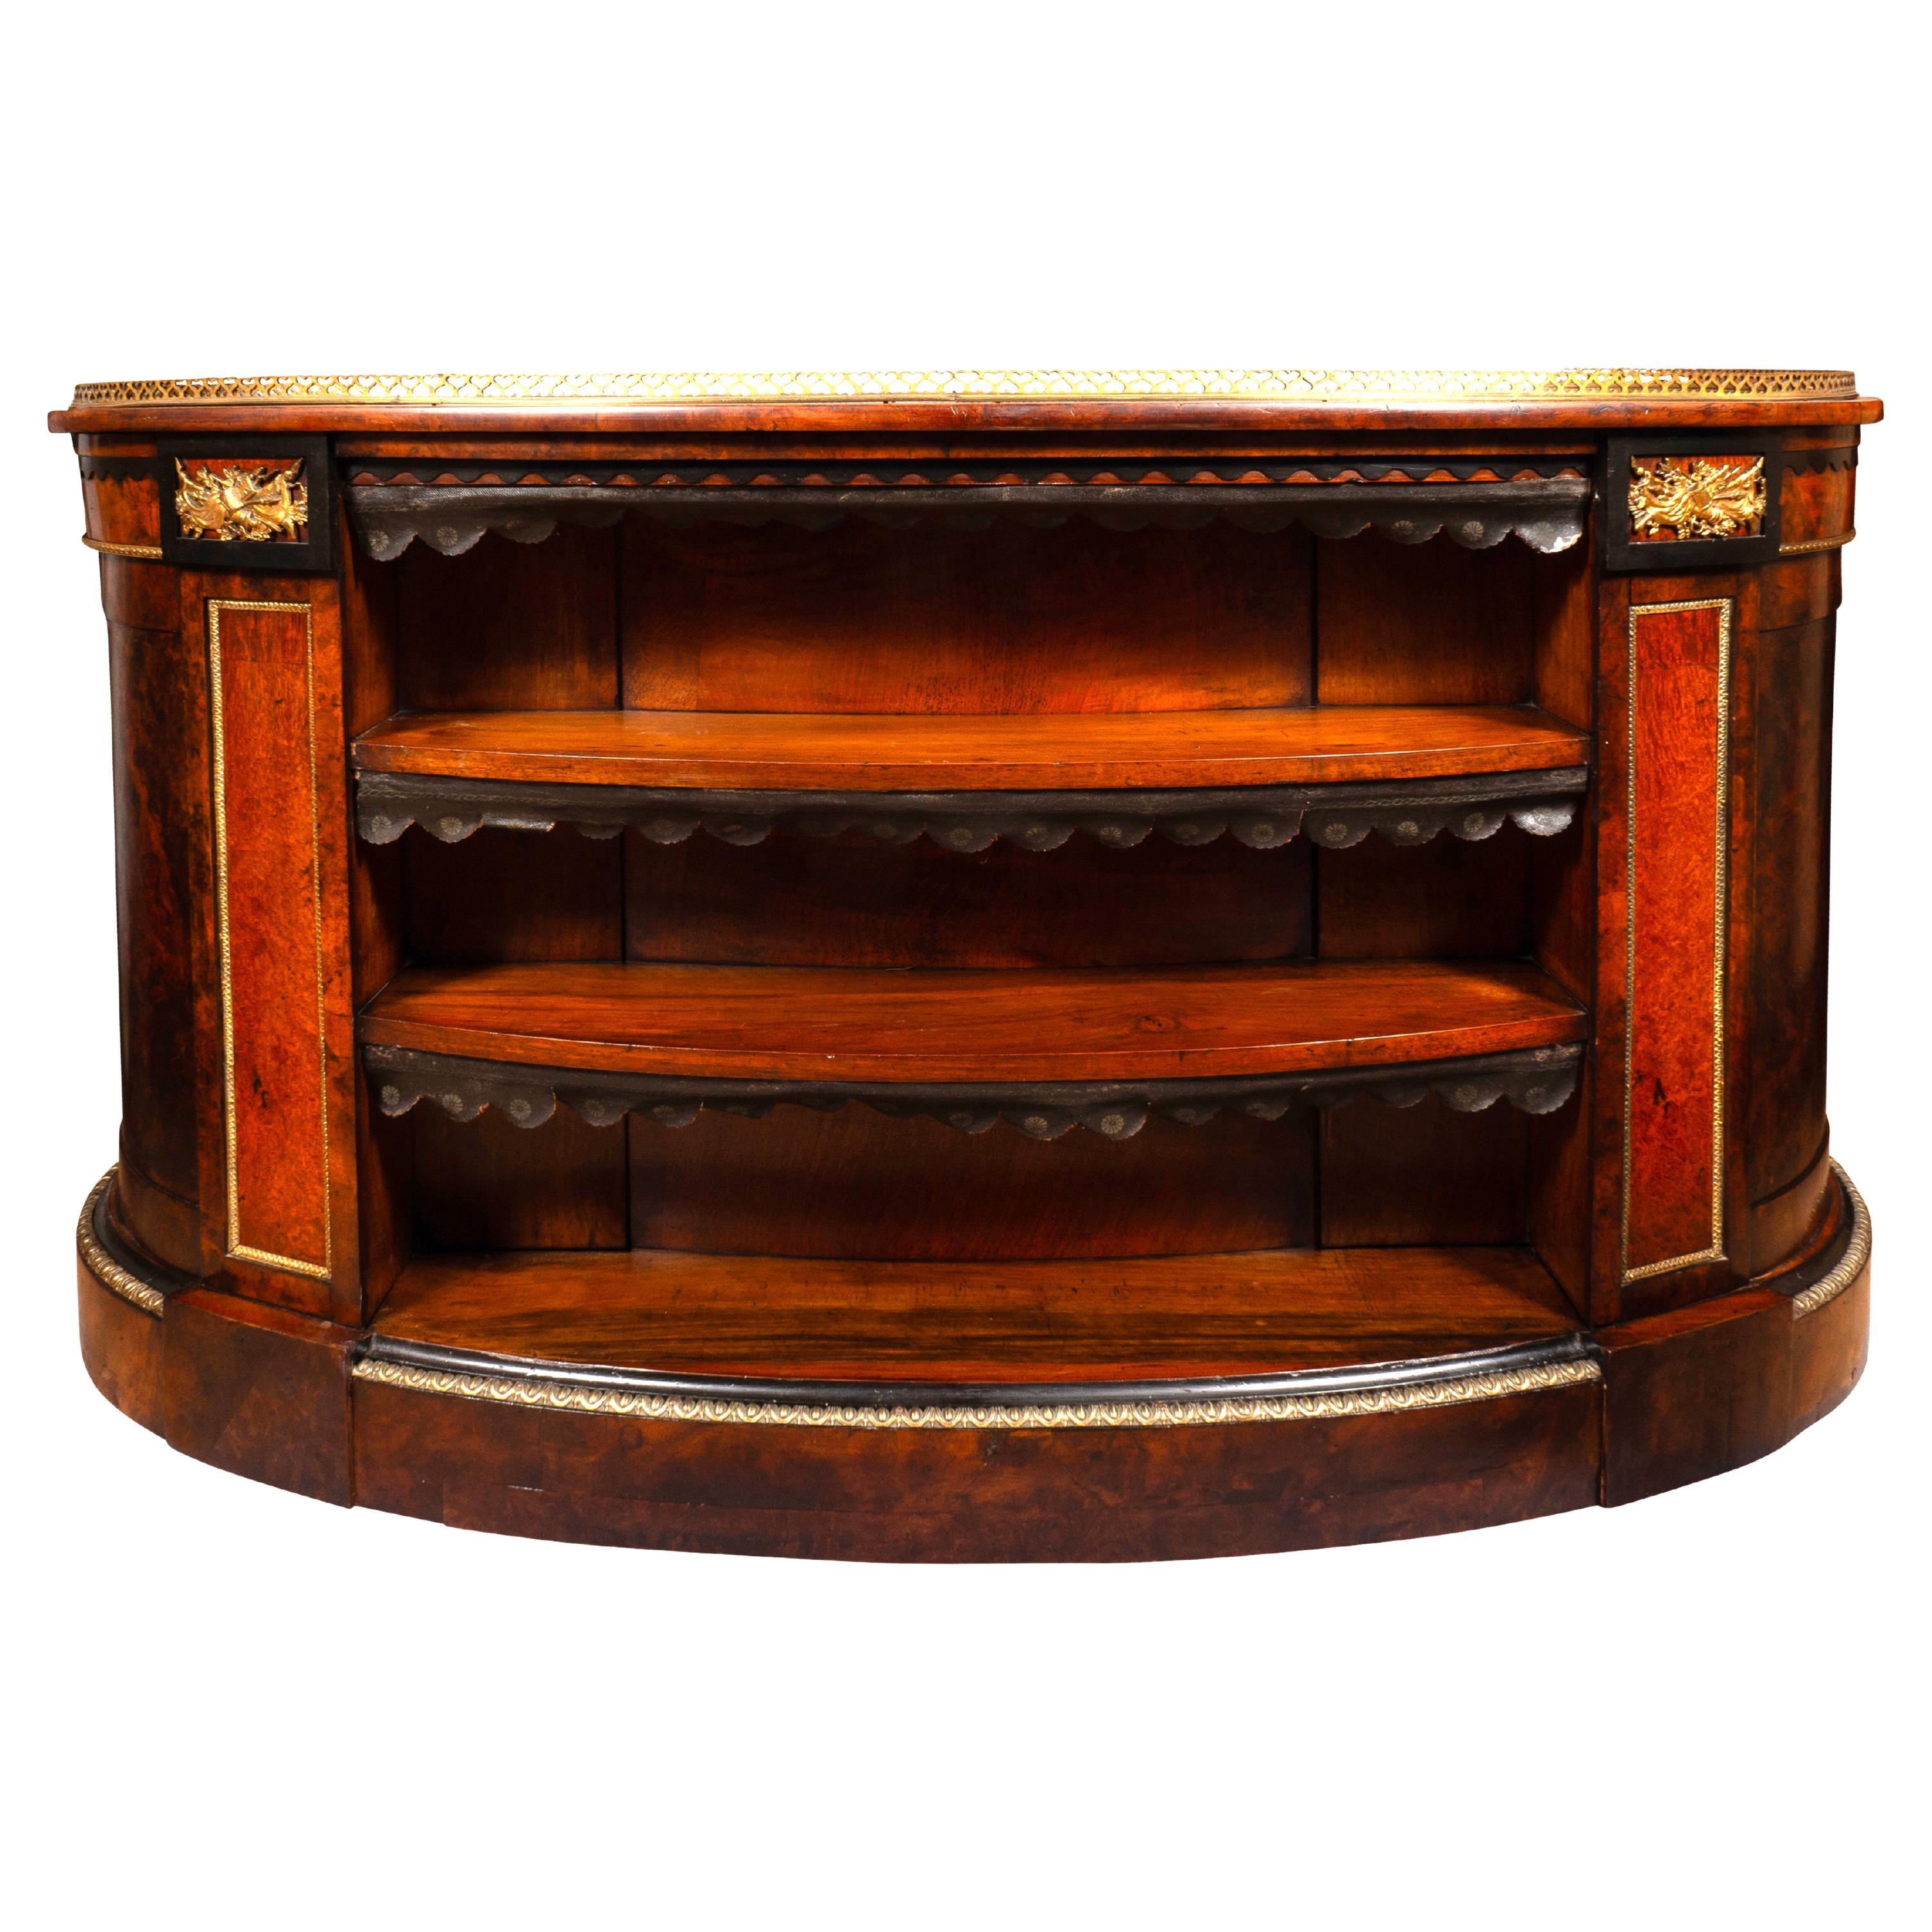 Kidney shaped top with conforming inset green leather and brass gallery over a central drawer flanked by smaller drawers and three drawers on each side of the knee hole. The reverse finished and having shelving. Bronze knobs and trim and military